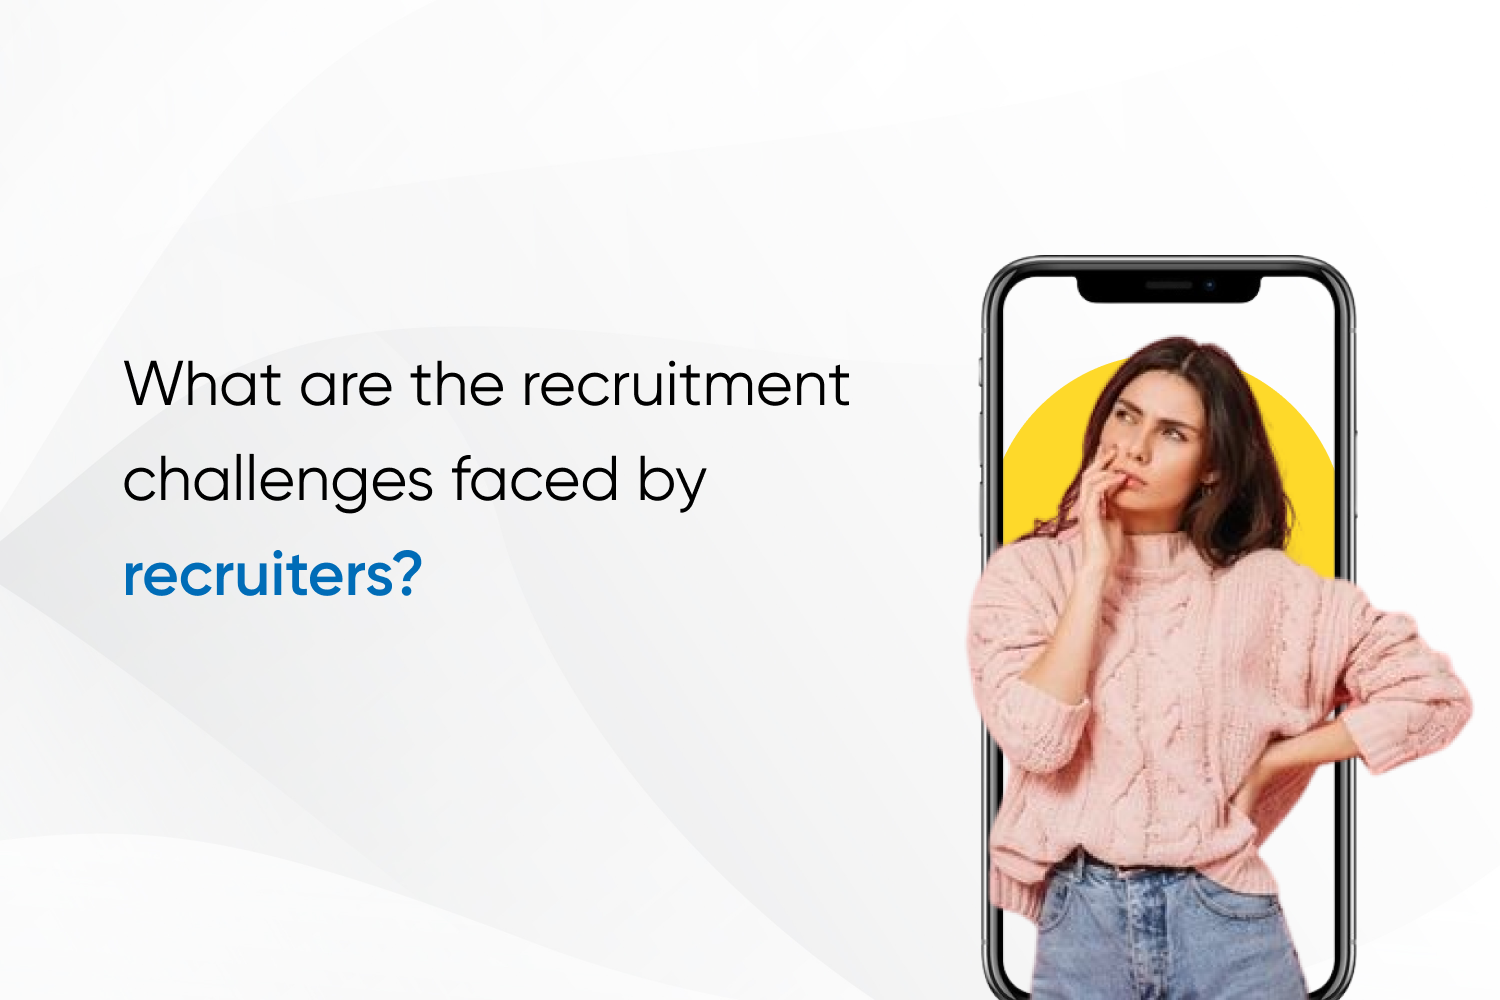 What are the recruitment challenges faced by recruiters?